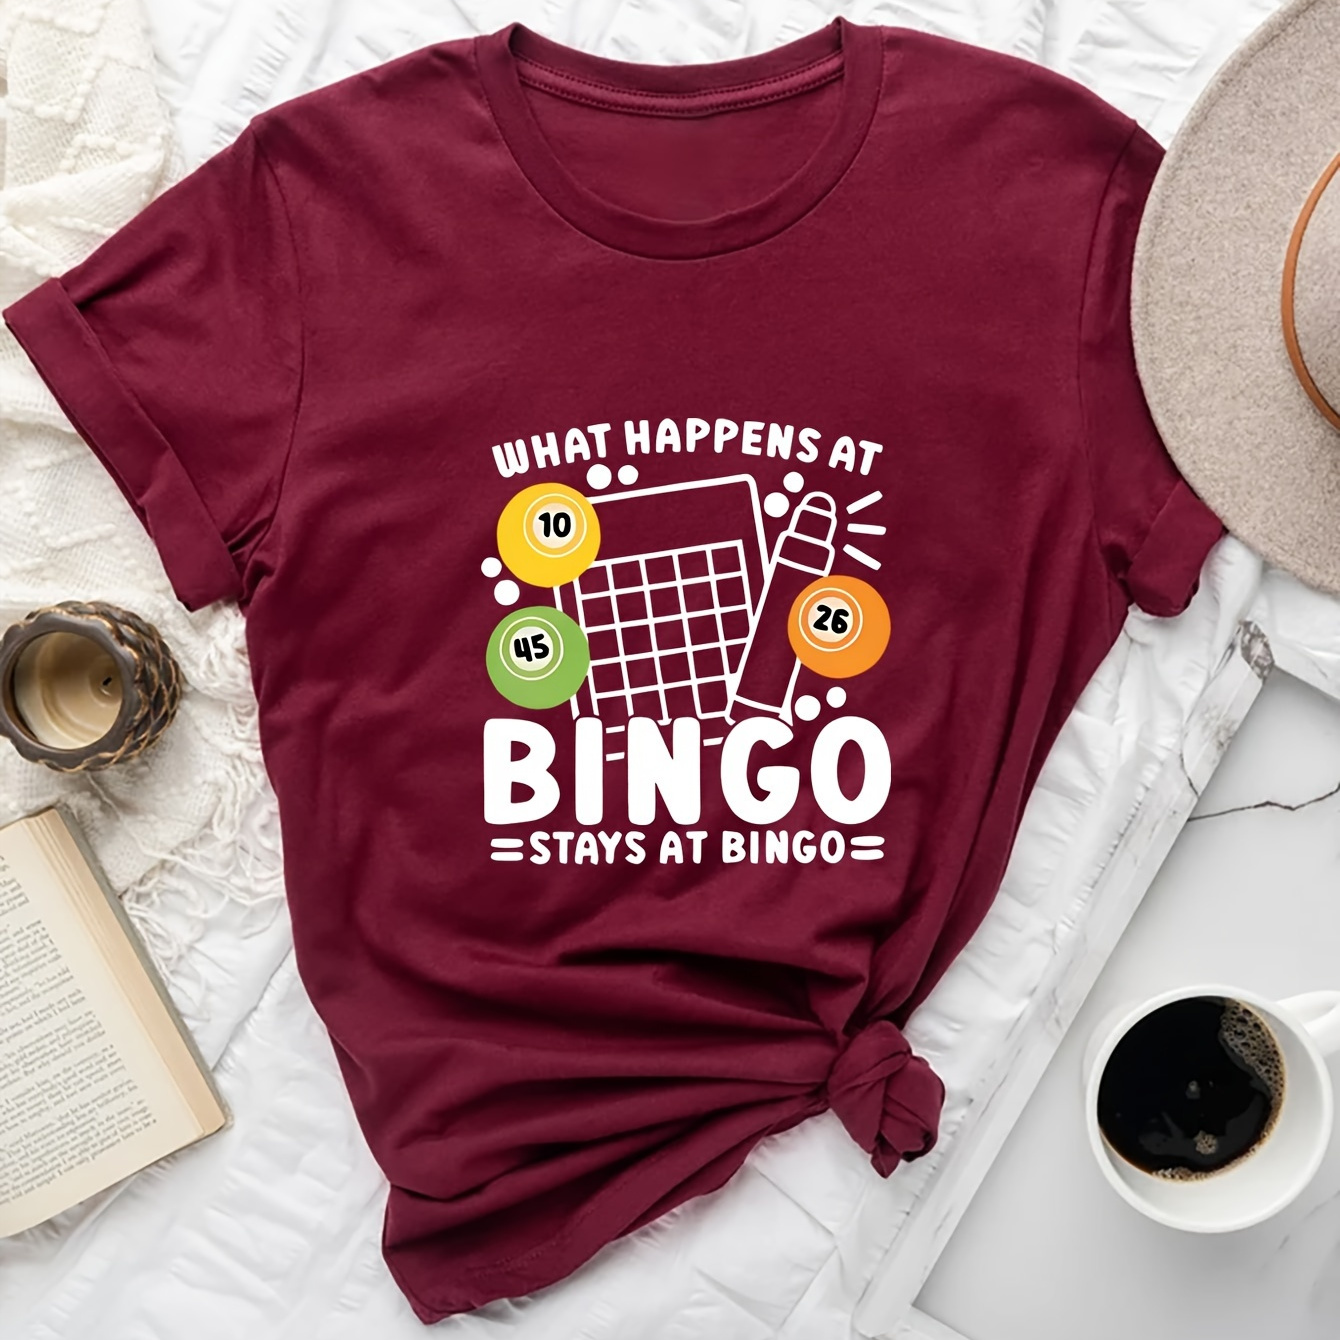 

Plus Size Bingo Print T-shirt, Casual Short Sleeve Crew Neck Top For Spring & Summer, Women's Plus Size Clothing